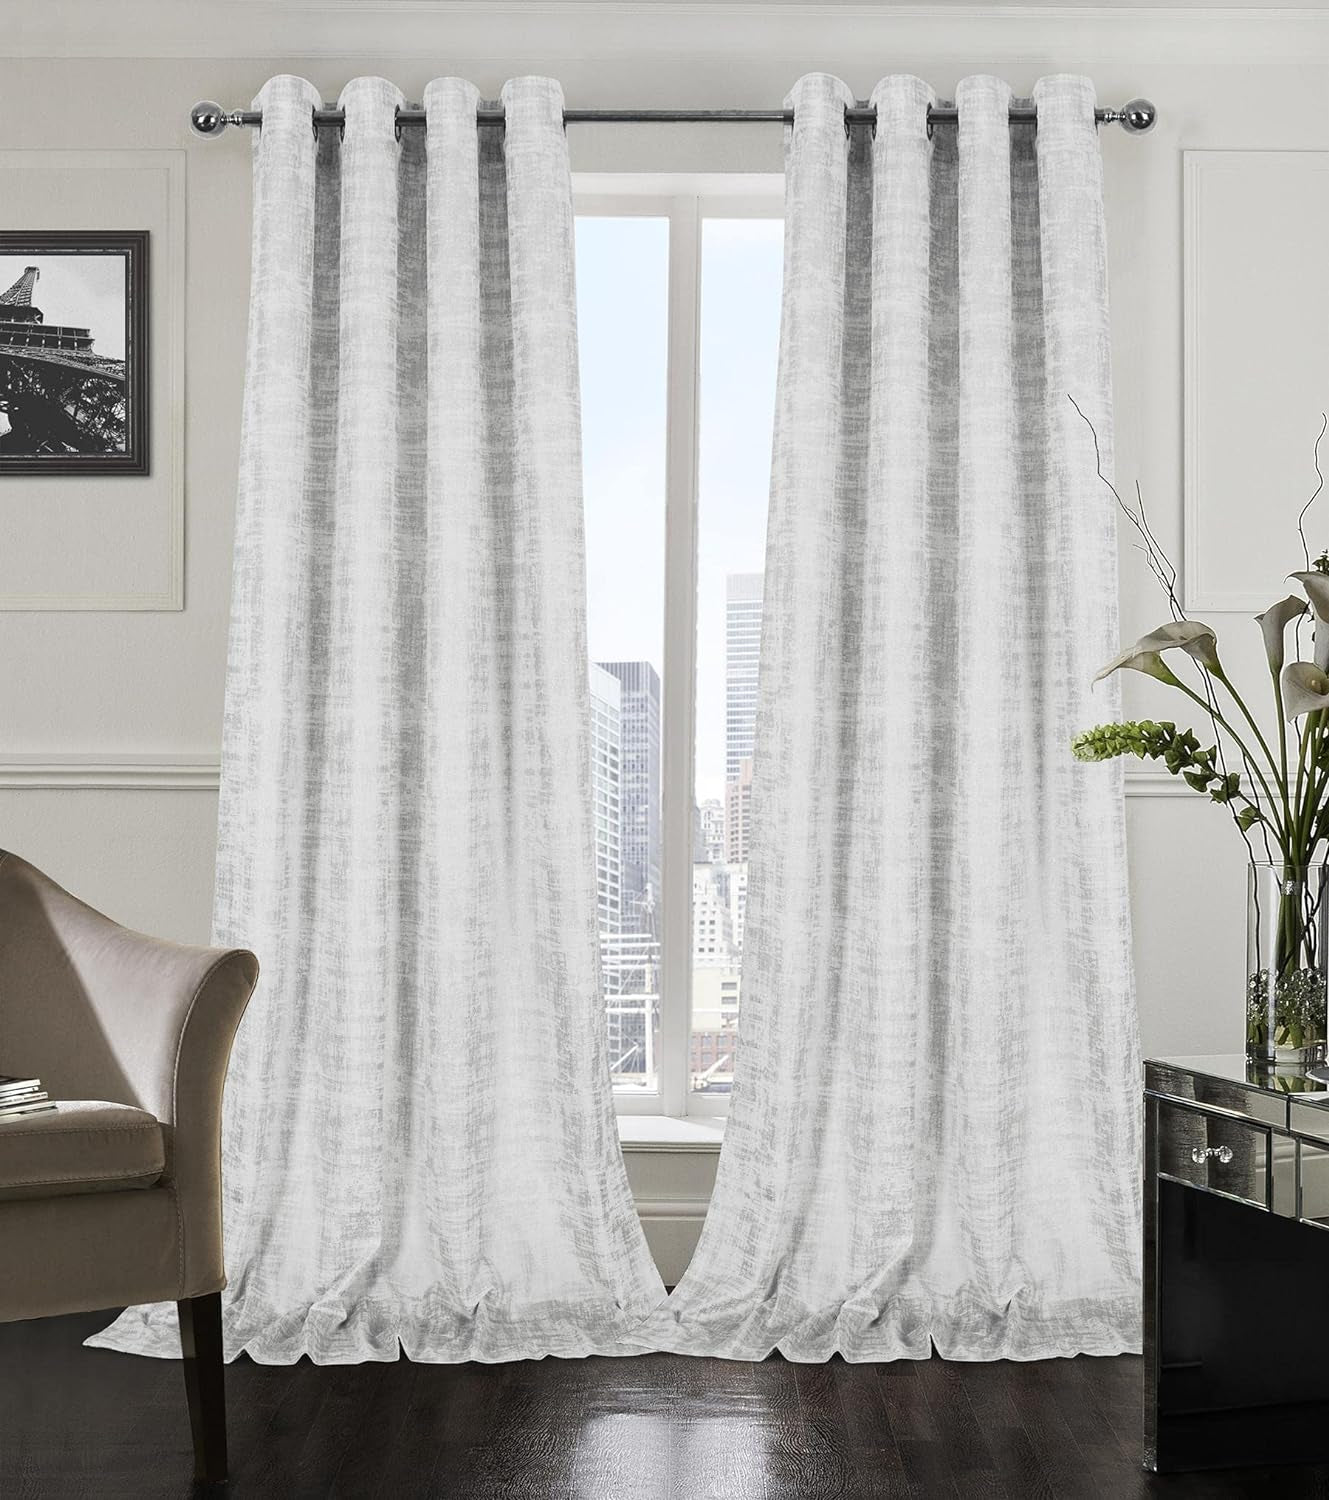 Always4U Soft Velvet Curtains 95 Inch Length Luxury Bedroom Curtains Gold Foil Print Window Curtains for Living Room 1 Panel White  always4u White (Silver Print) 2 Panels: 52''W*120''L 